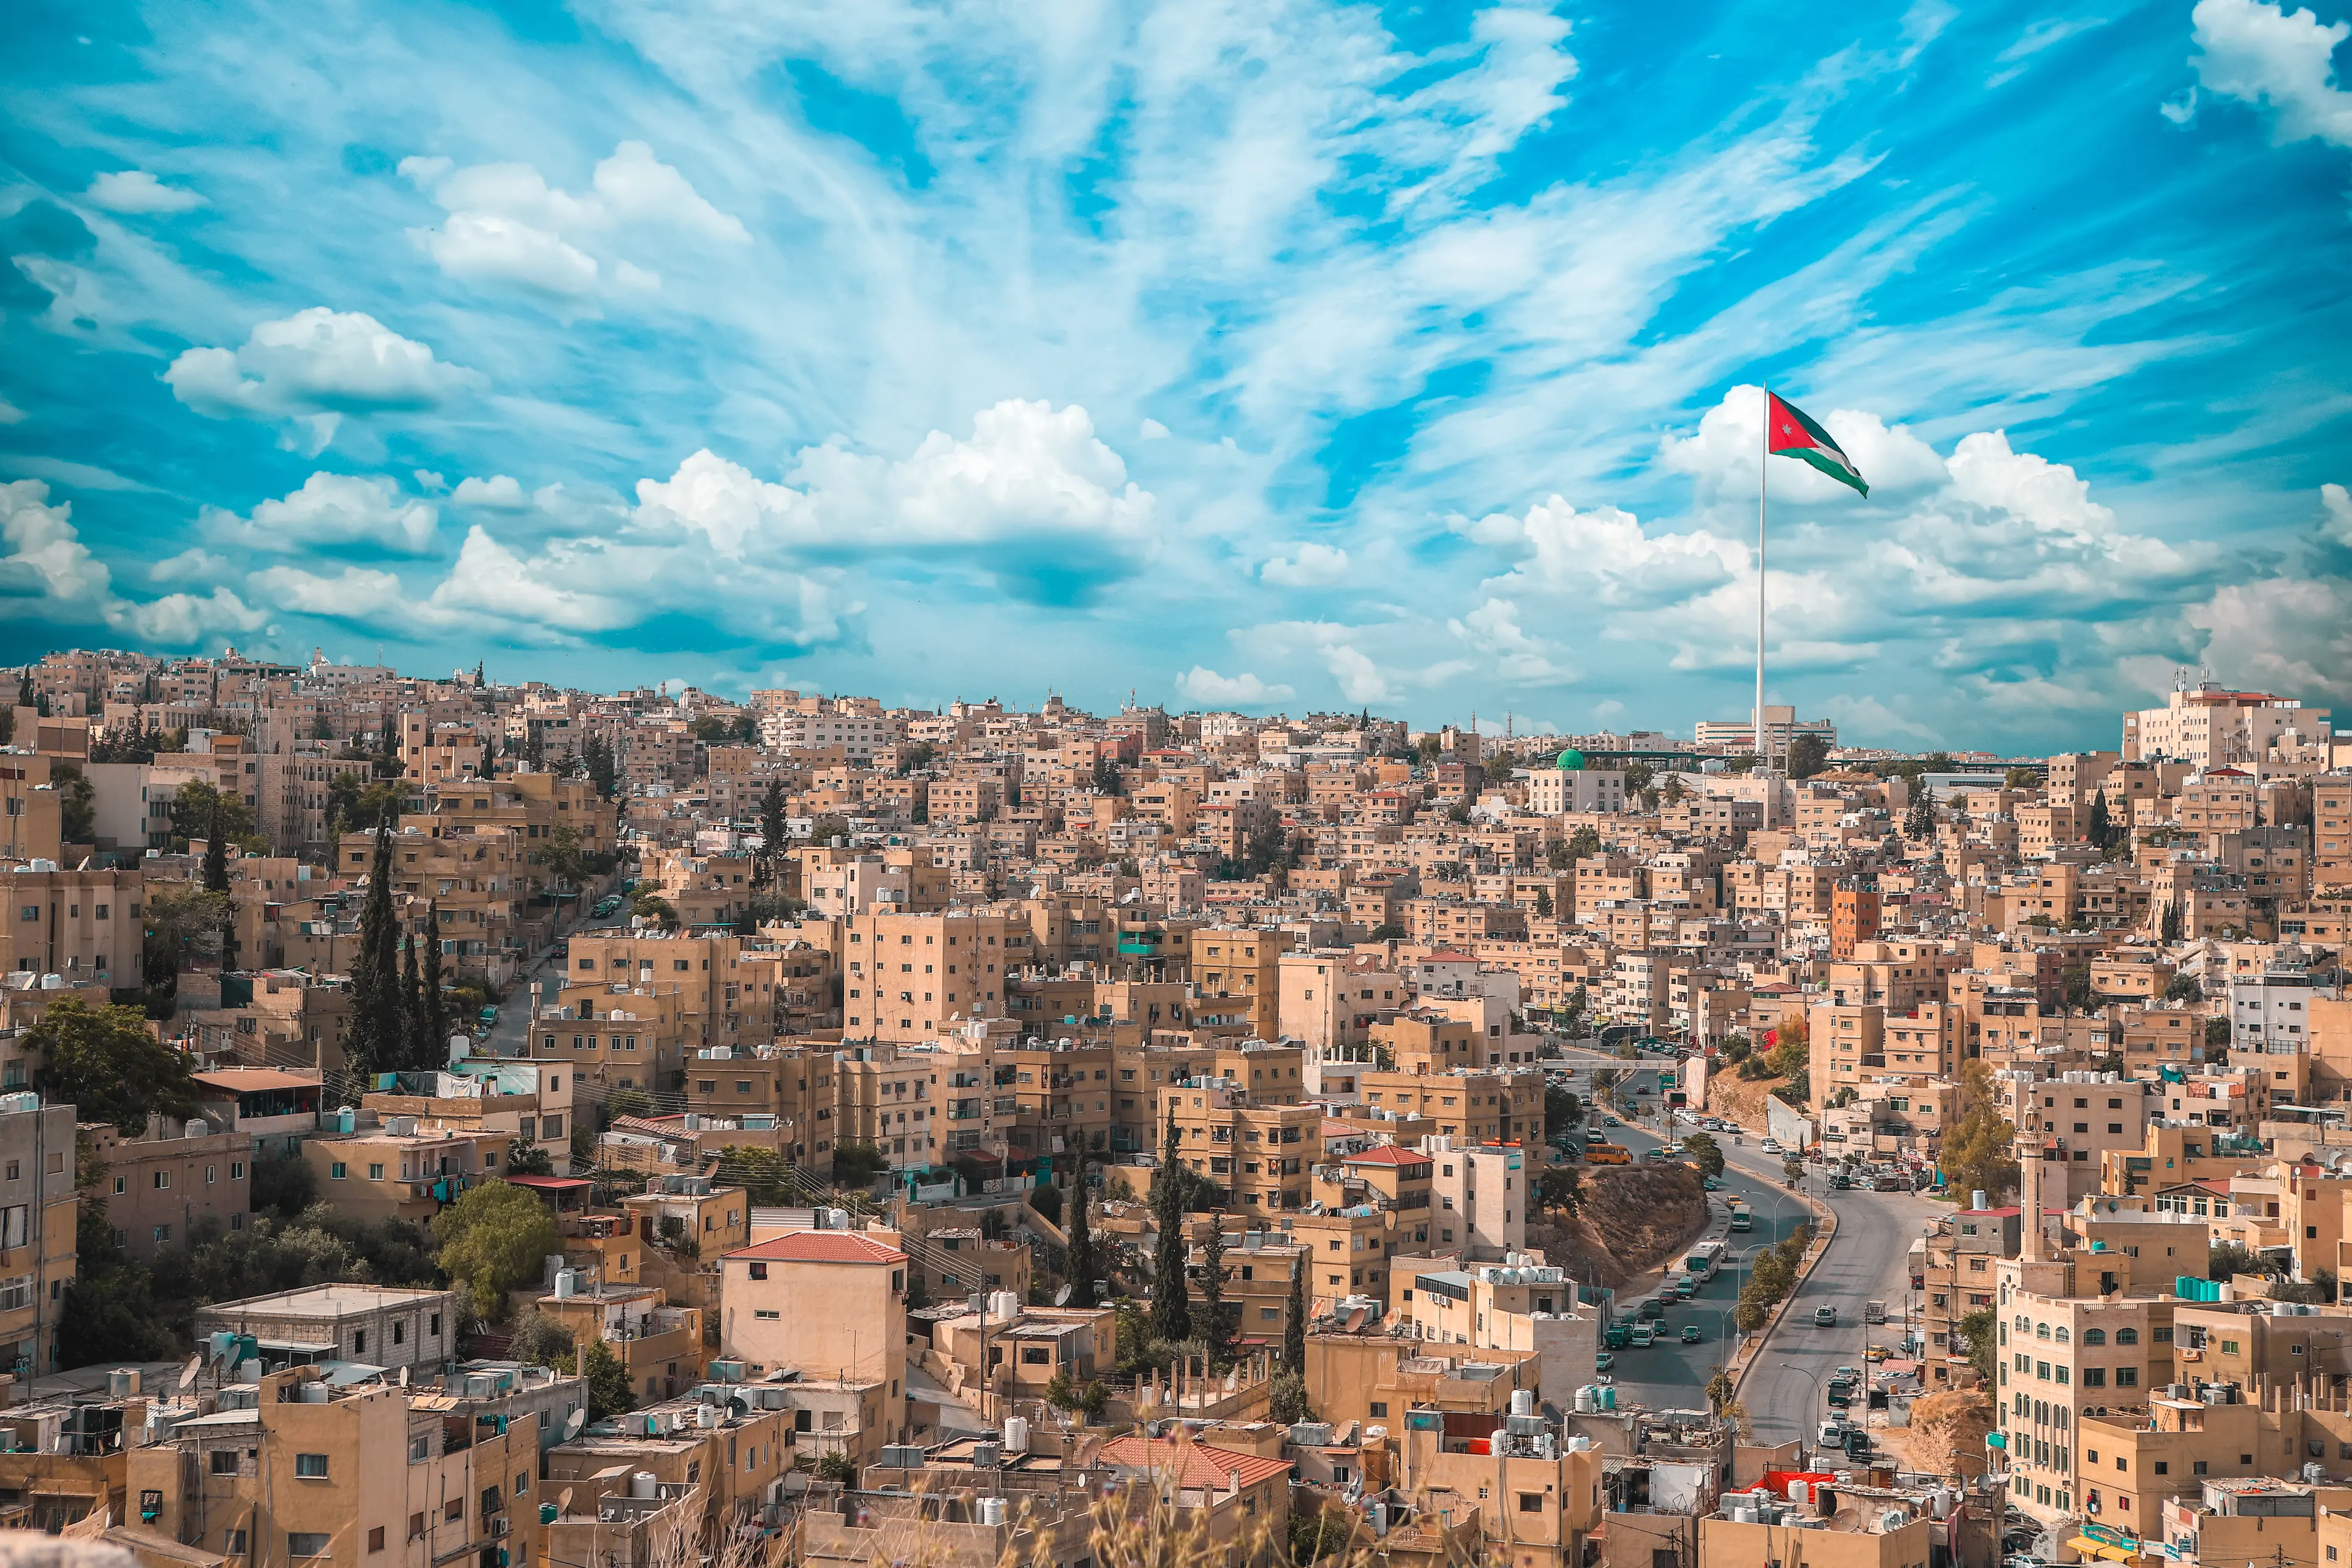 Romantic 1-Day Sightseeing and Nightlife Tour in Amman for Locals